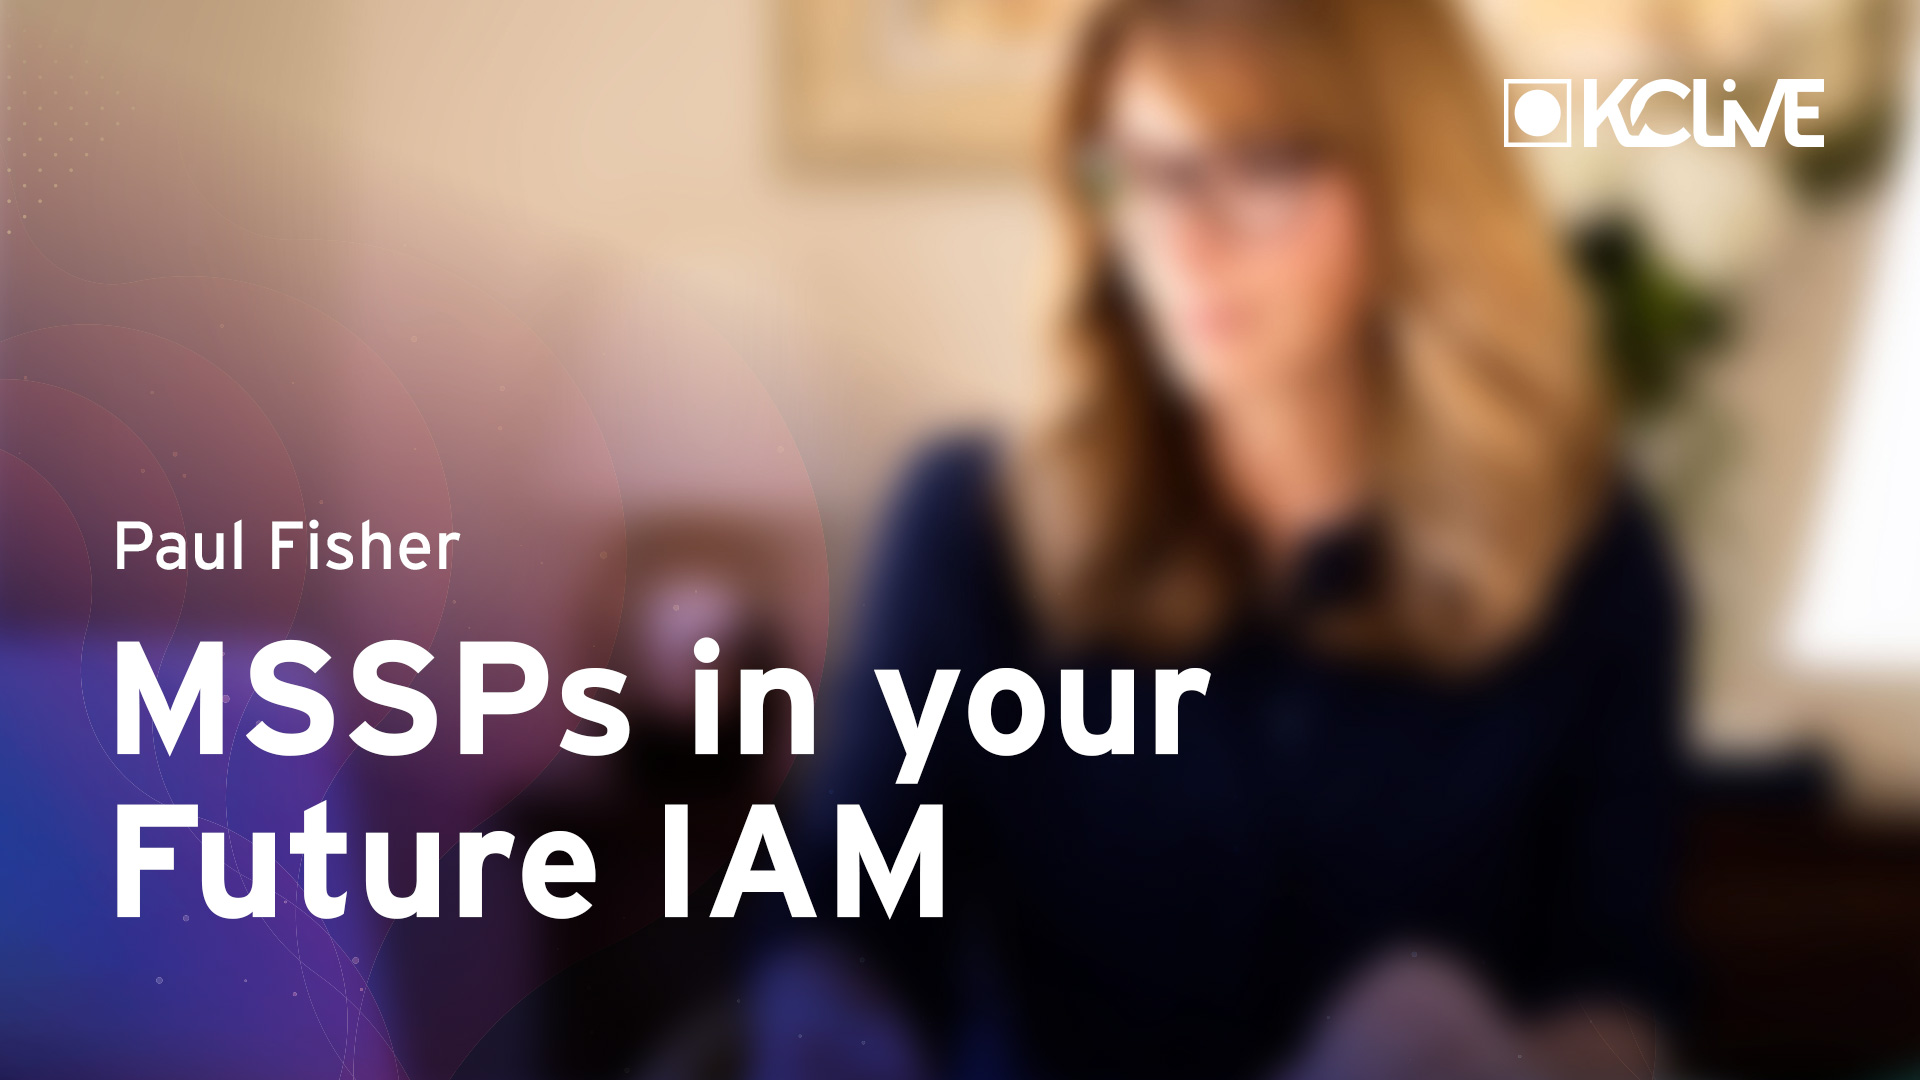 The Role of Managed Security Service Providers (MSSPs) In Your Future IAM Application Landscape